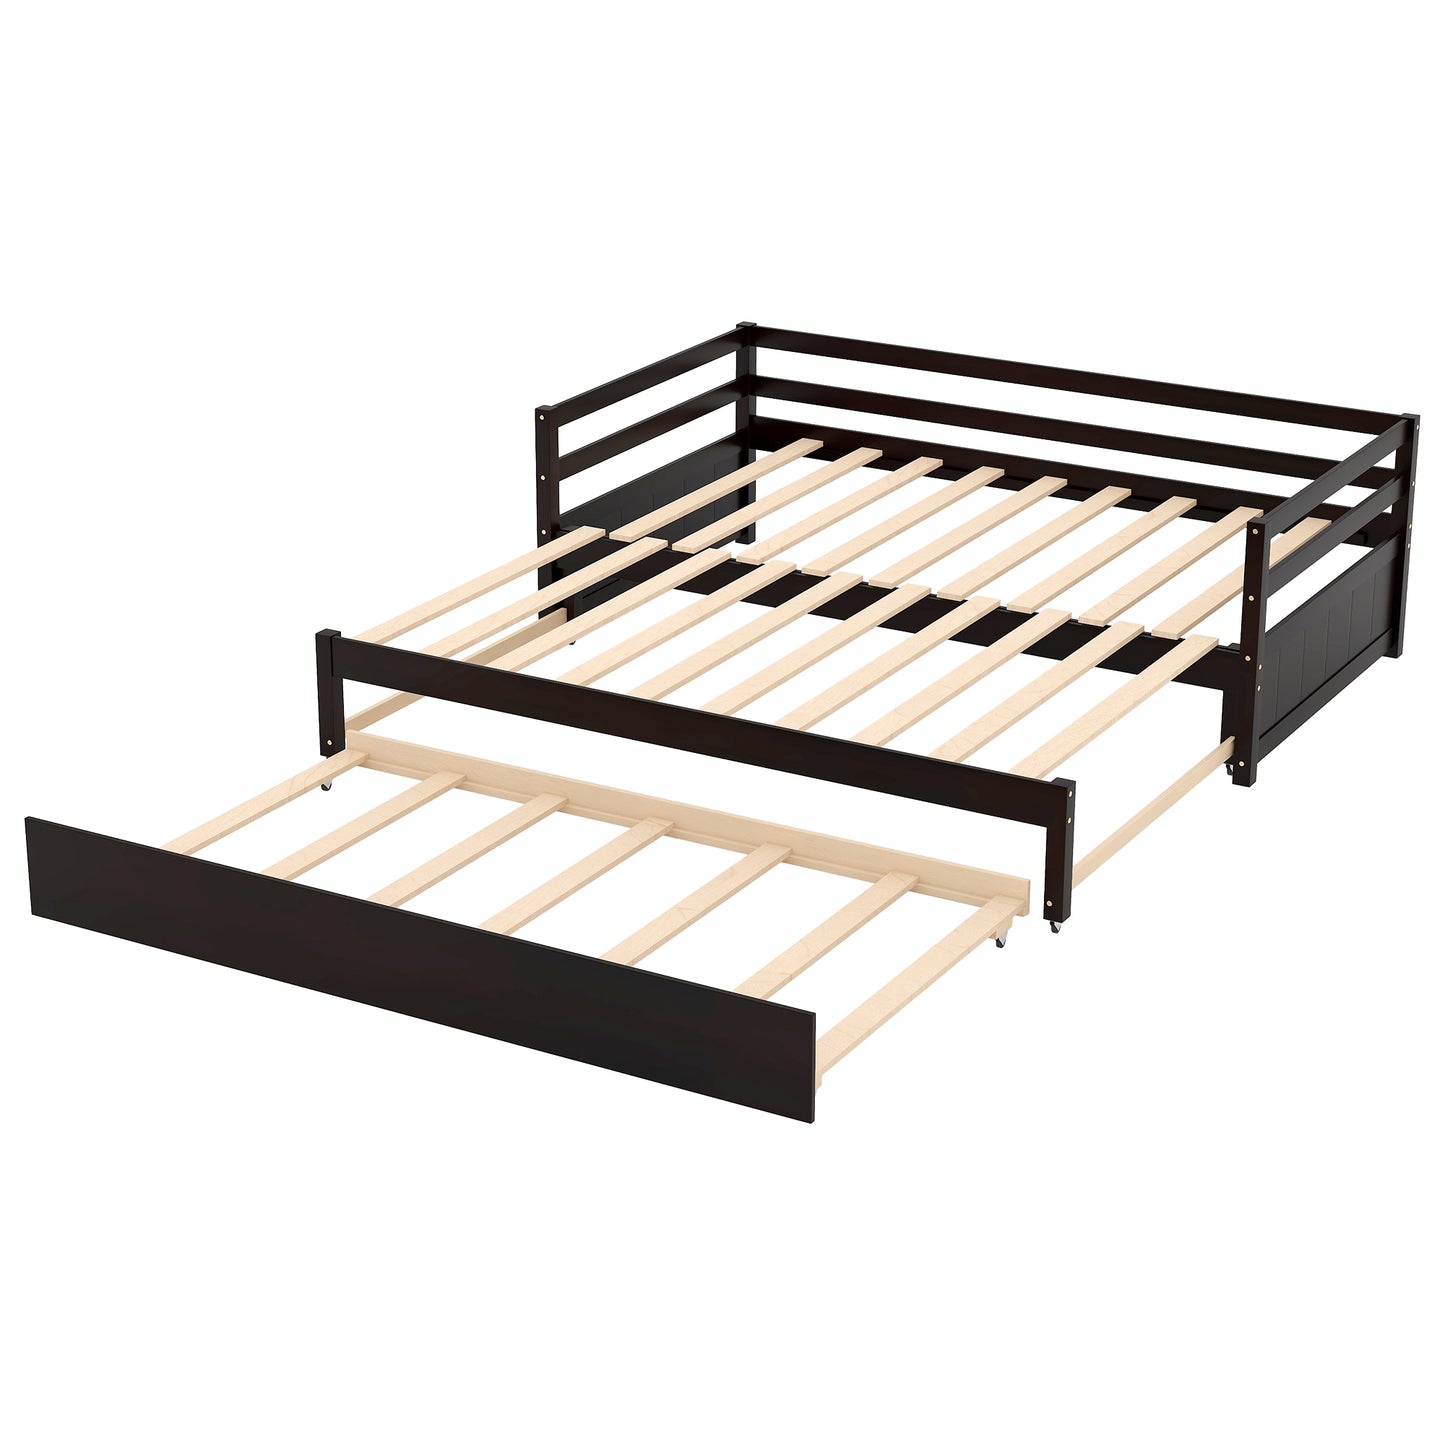 Twin or Double Twin Daybed with Trundle,Espresso